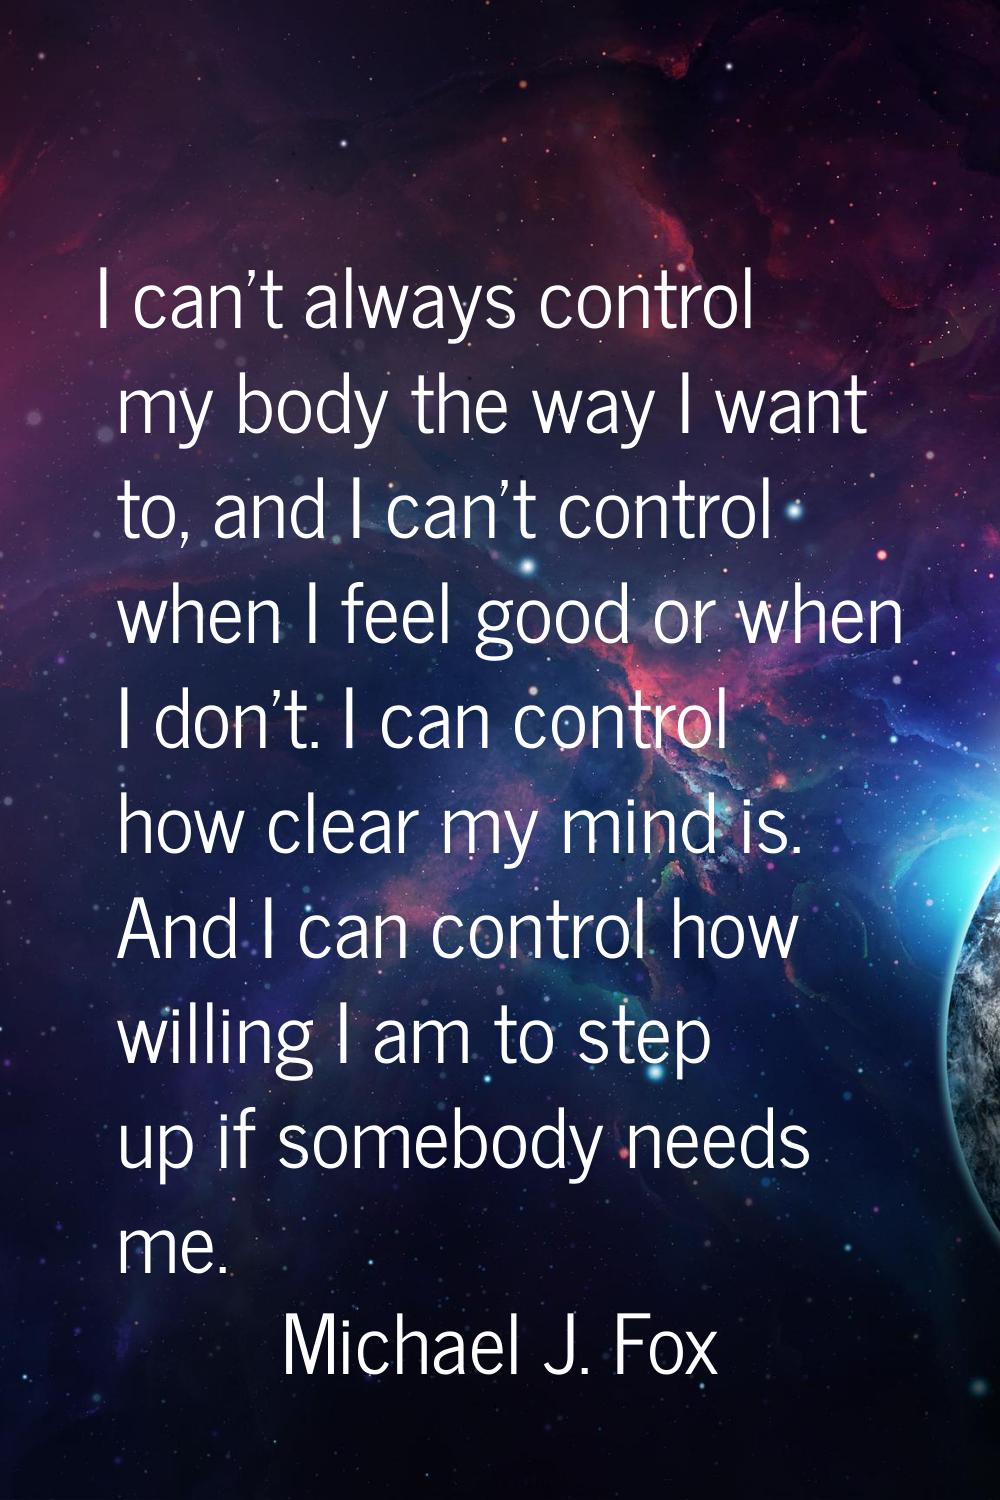 I can't always control my body the way I want to, and I can't control when I feel good or when I do